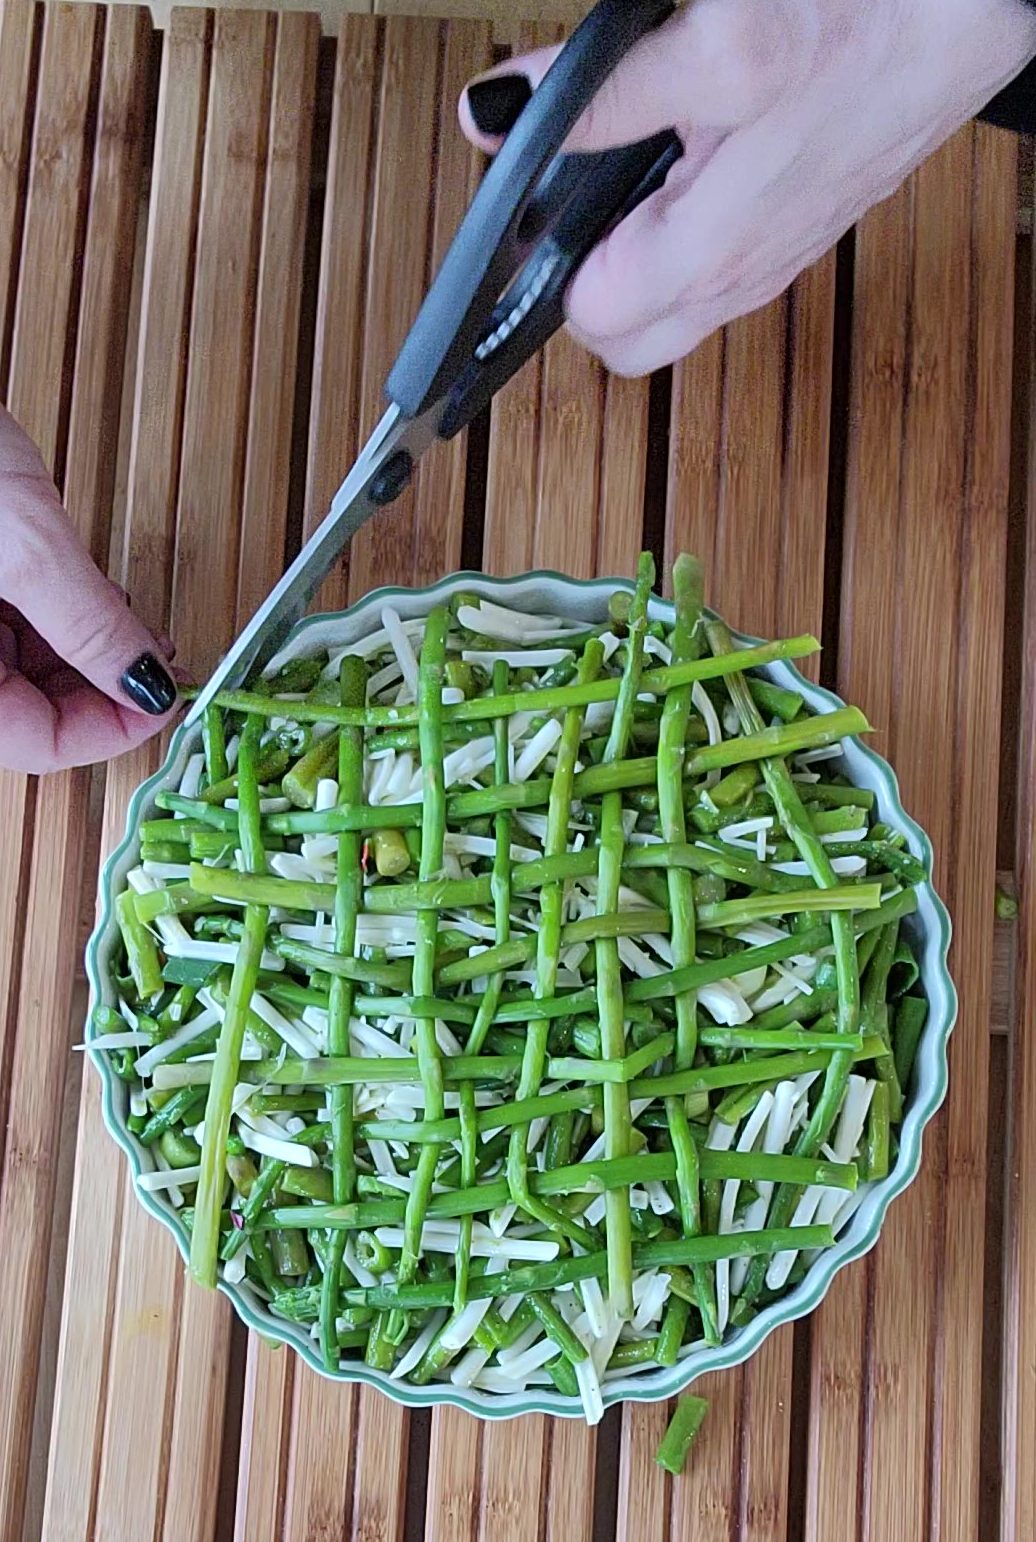 Trim the excess asparagus using a kitchen sheers.